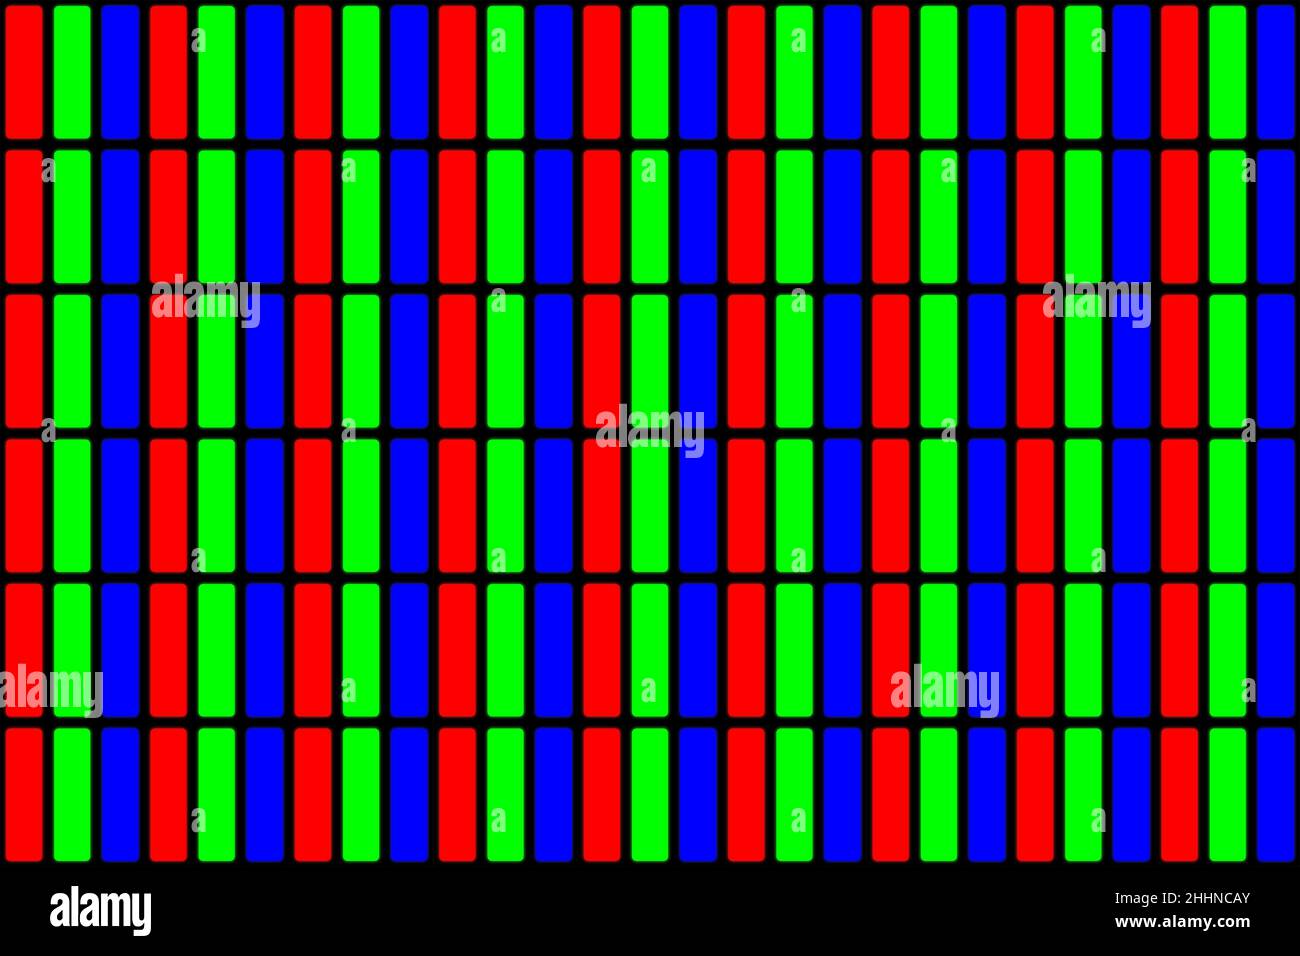 Seamless texture of the AMOLED screen with red, green and blue pixels usually found on smartphones Stock Photo